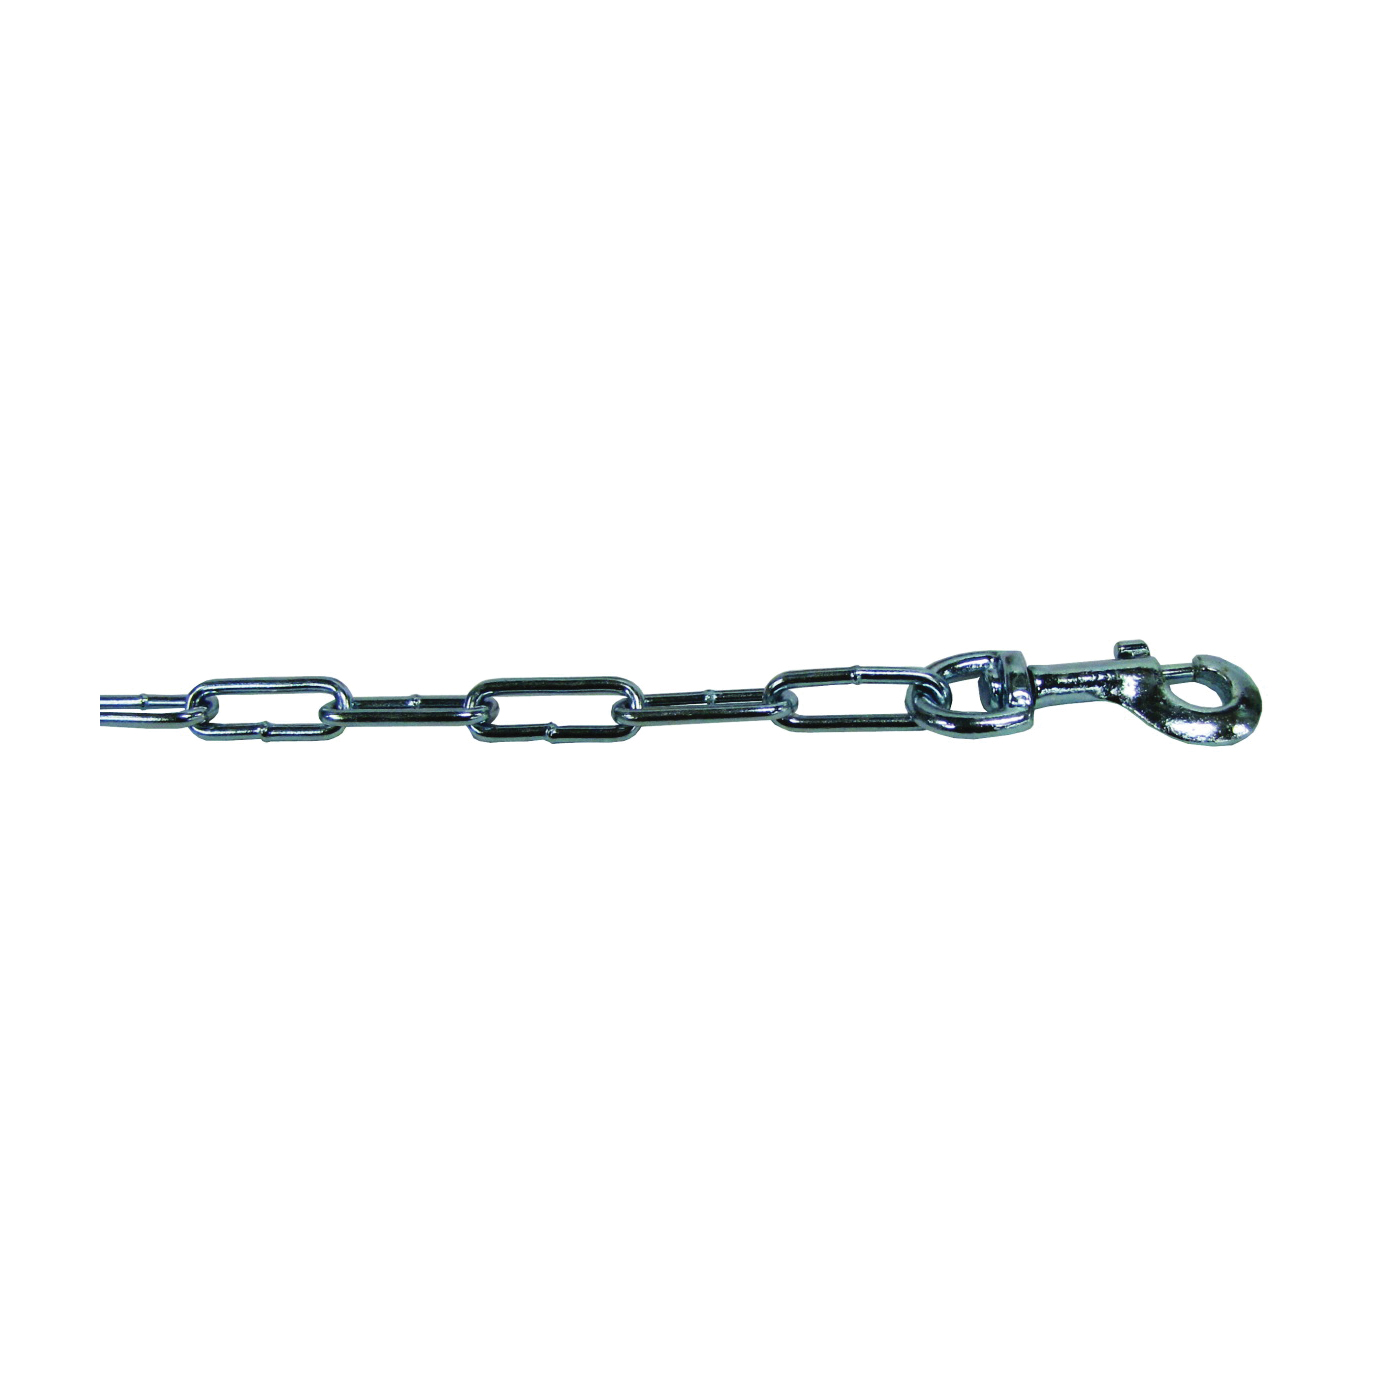 PDQ 09415 Tie-Out Chain, Welded Link, 15 ft L Belt/Cable, Steel, For: Dogs Up to 125 lb